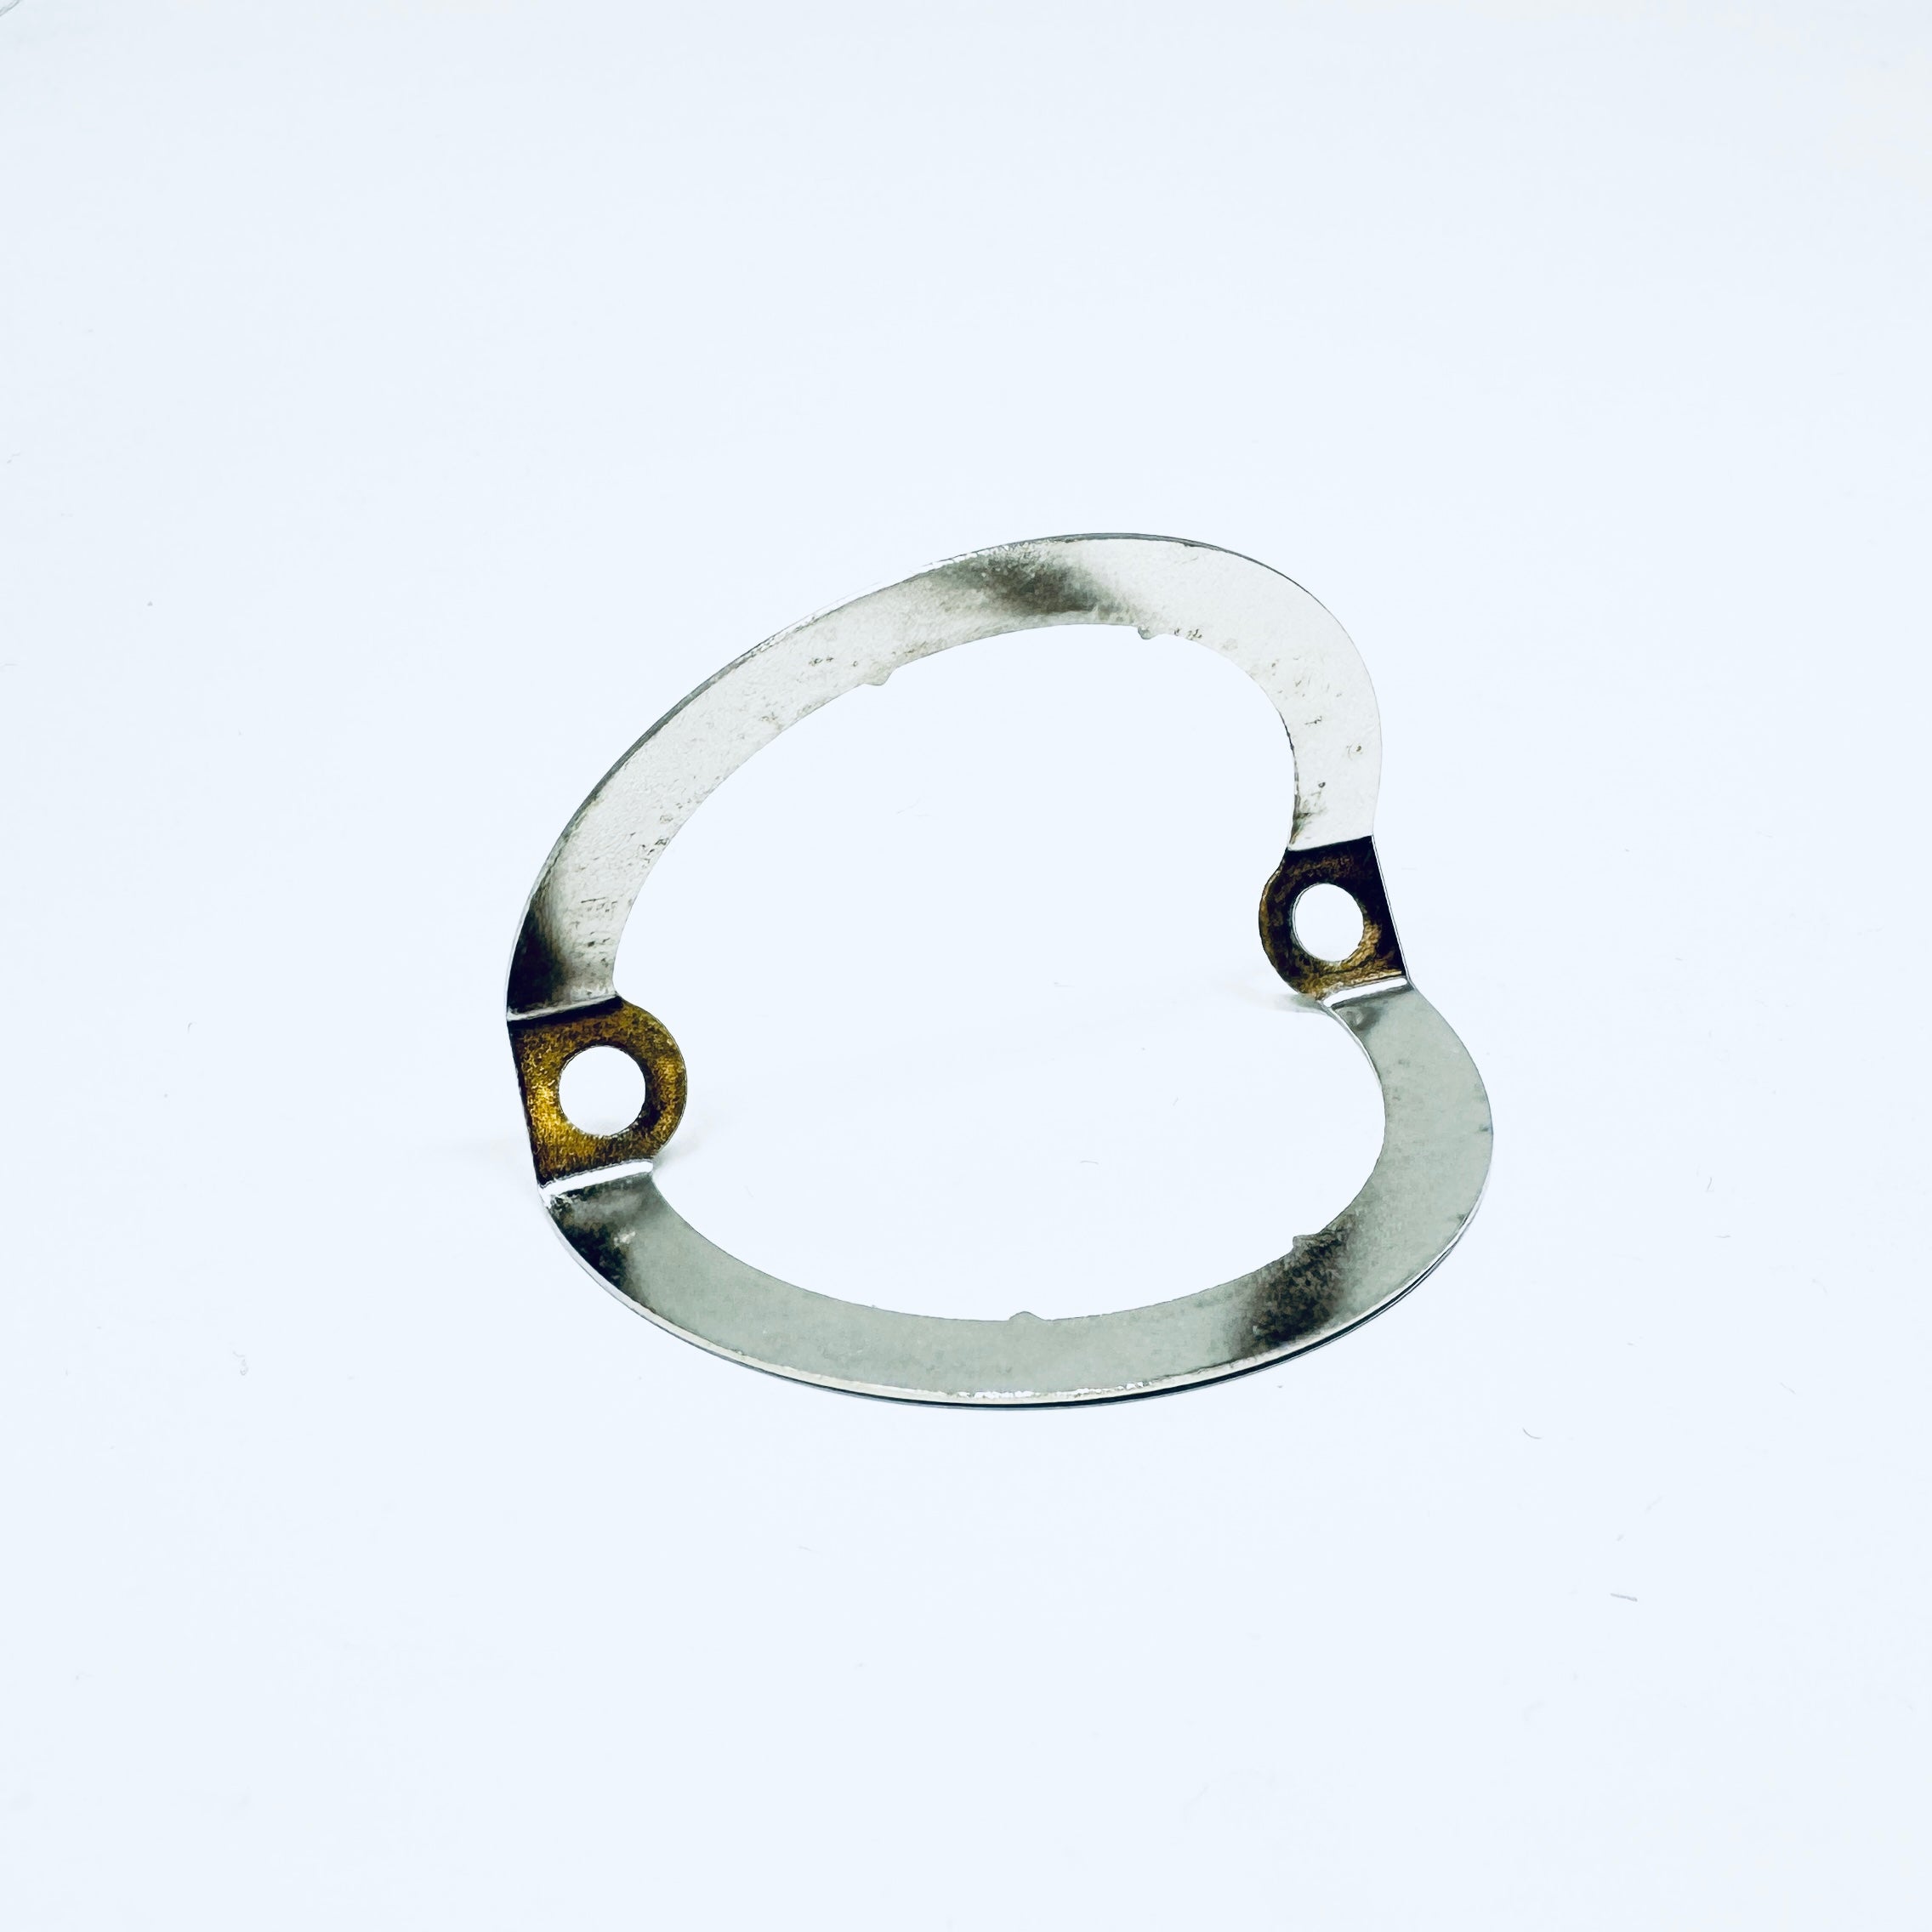 Power Tube clamp for amplifiers, secure tubes, ruby tube clamp with teeth